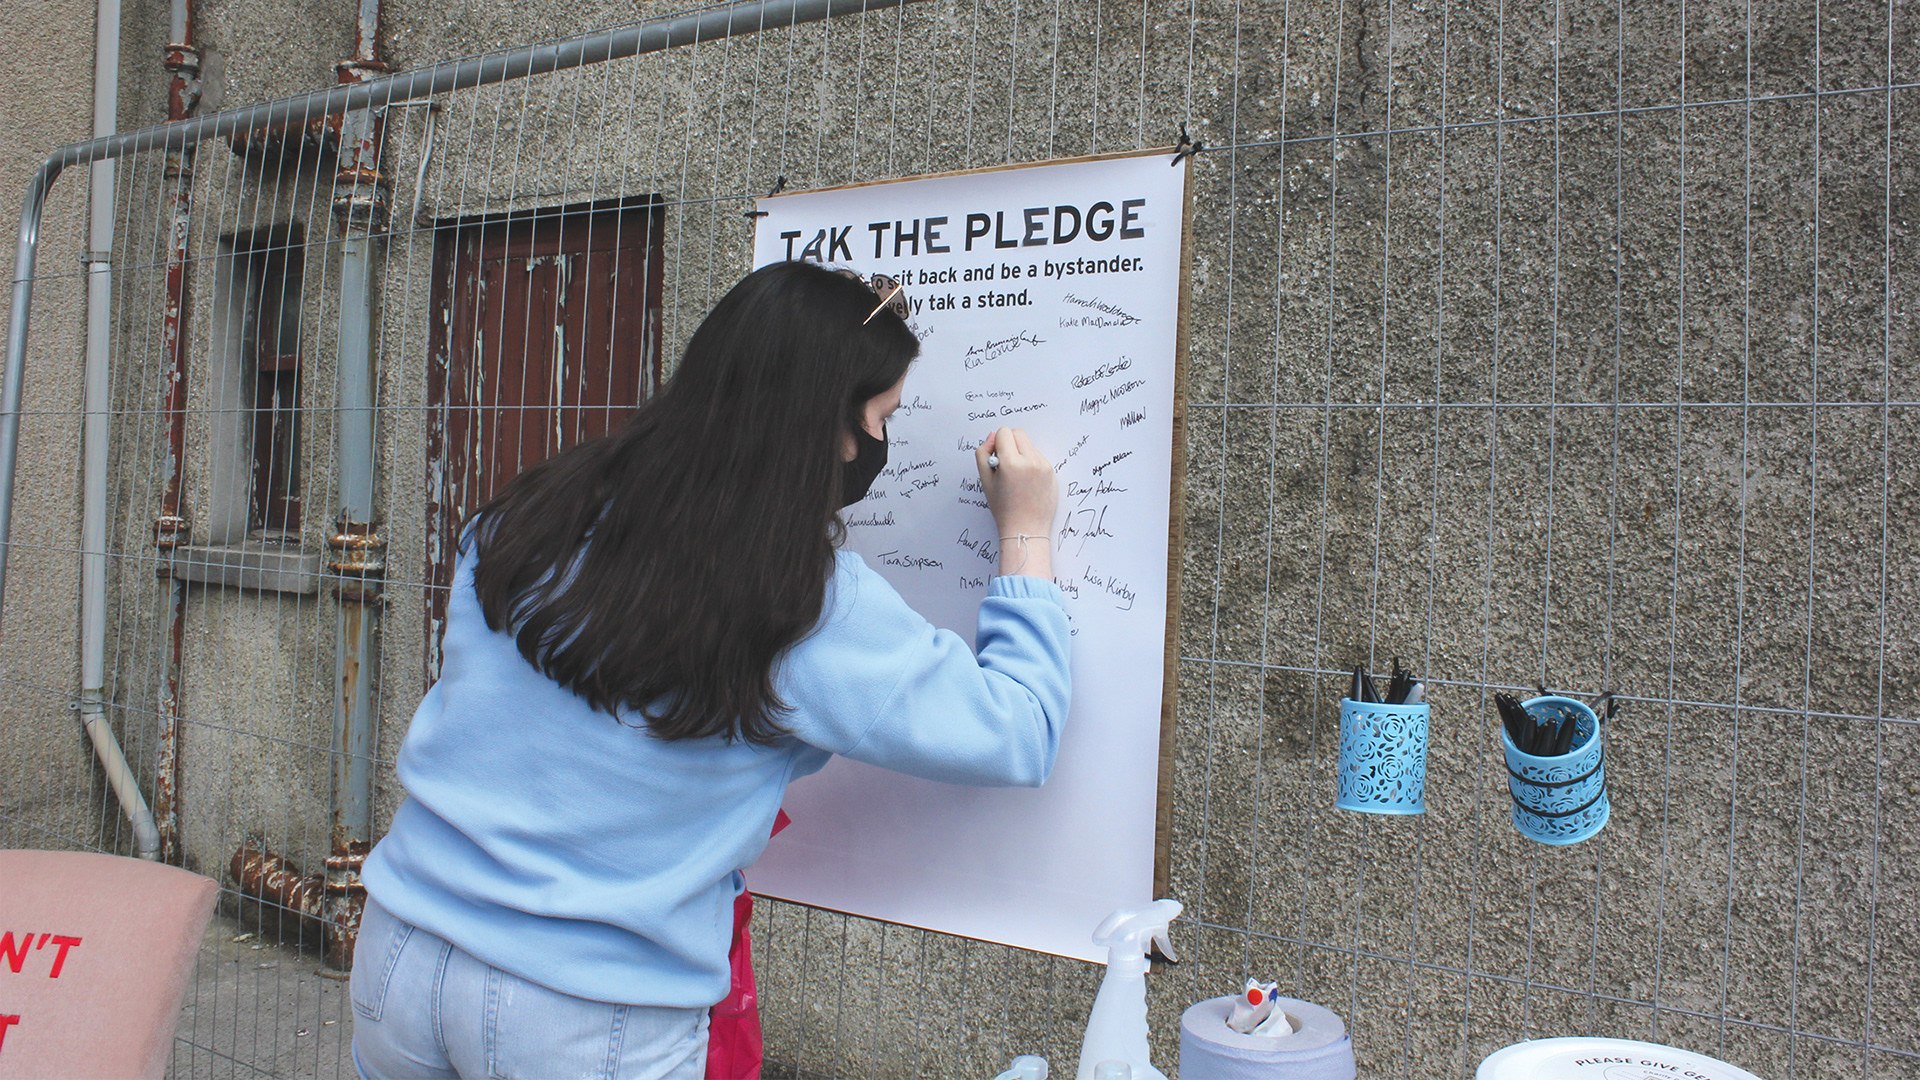 A temporary Tak A Stand exhibit urged people sign a pledge promising to call out sexual violence.